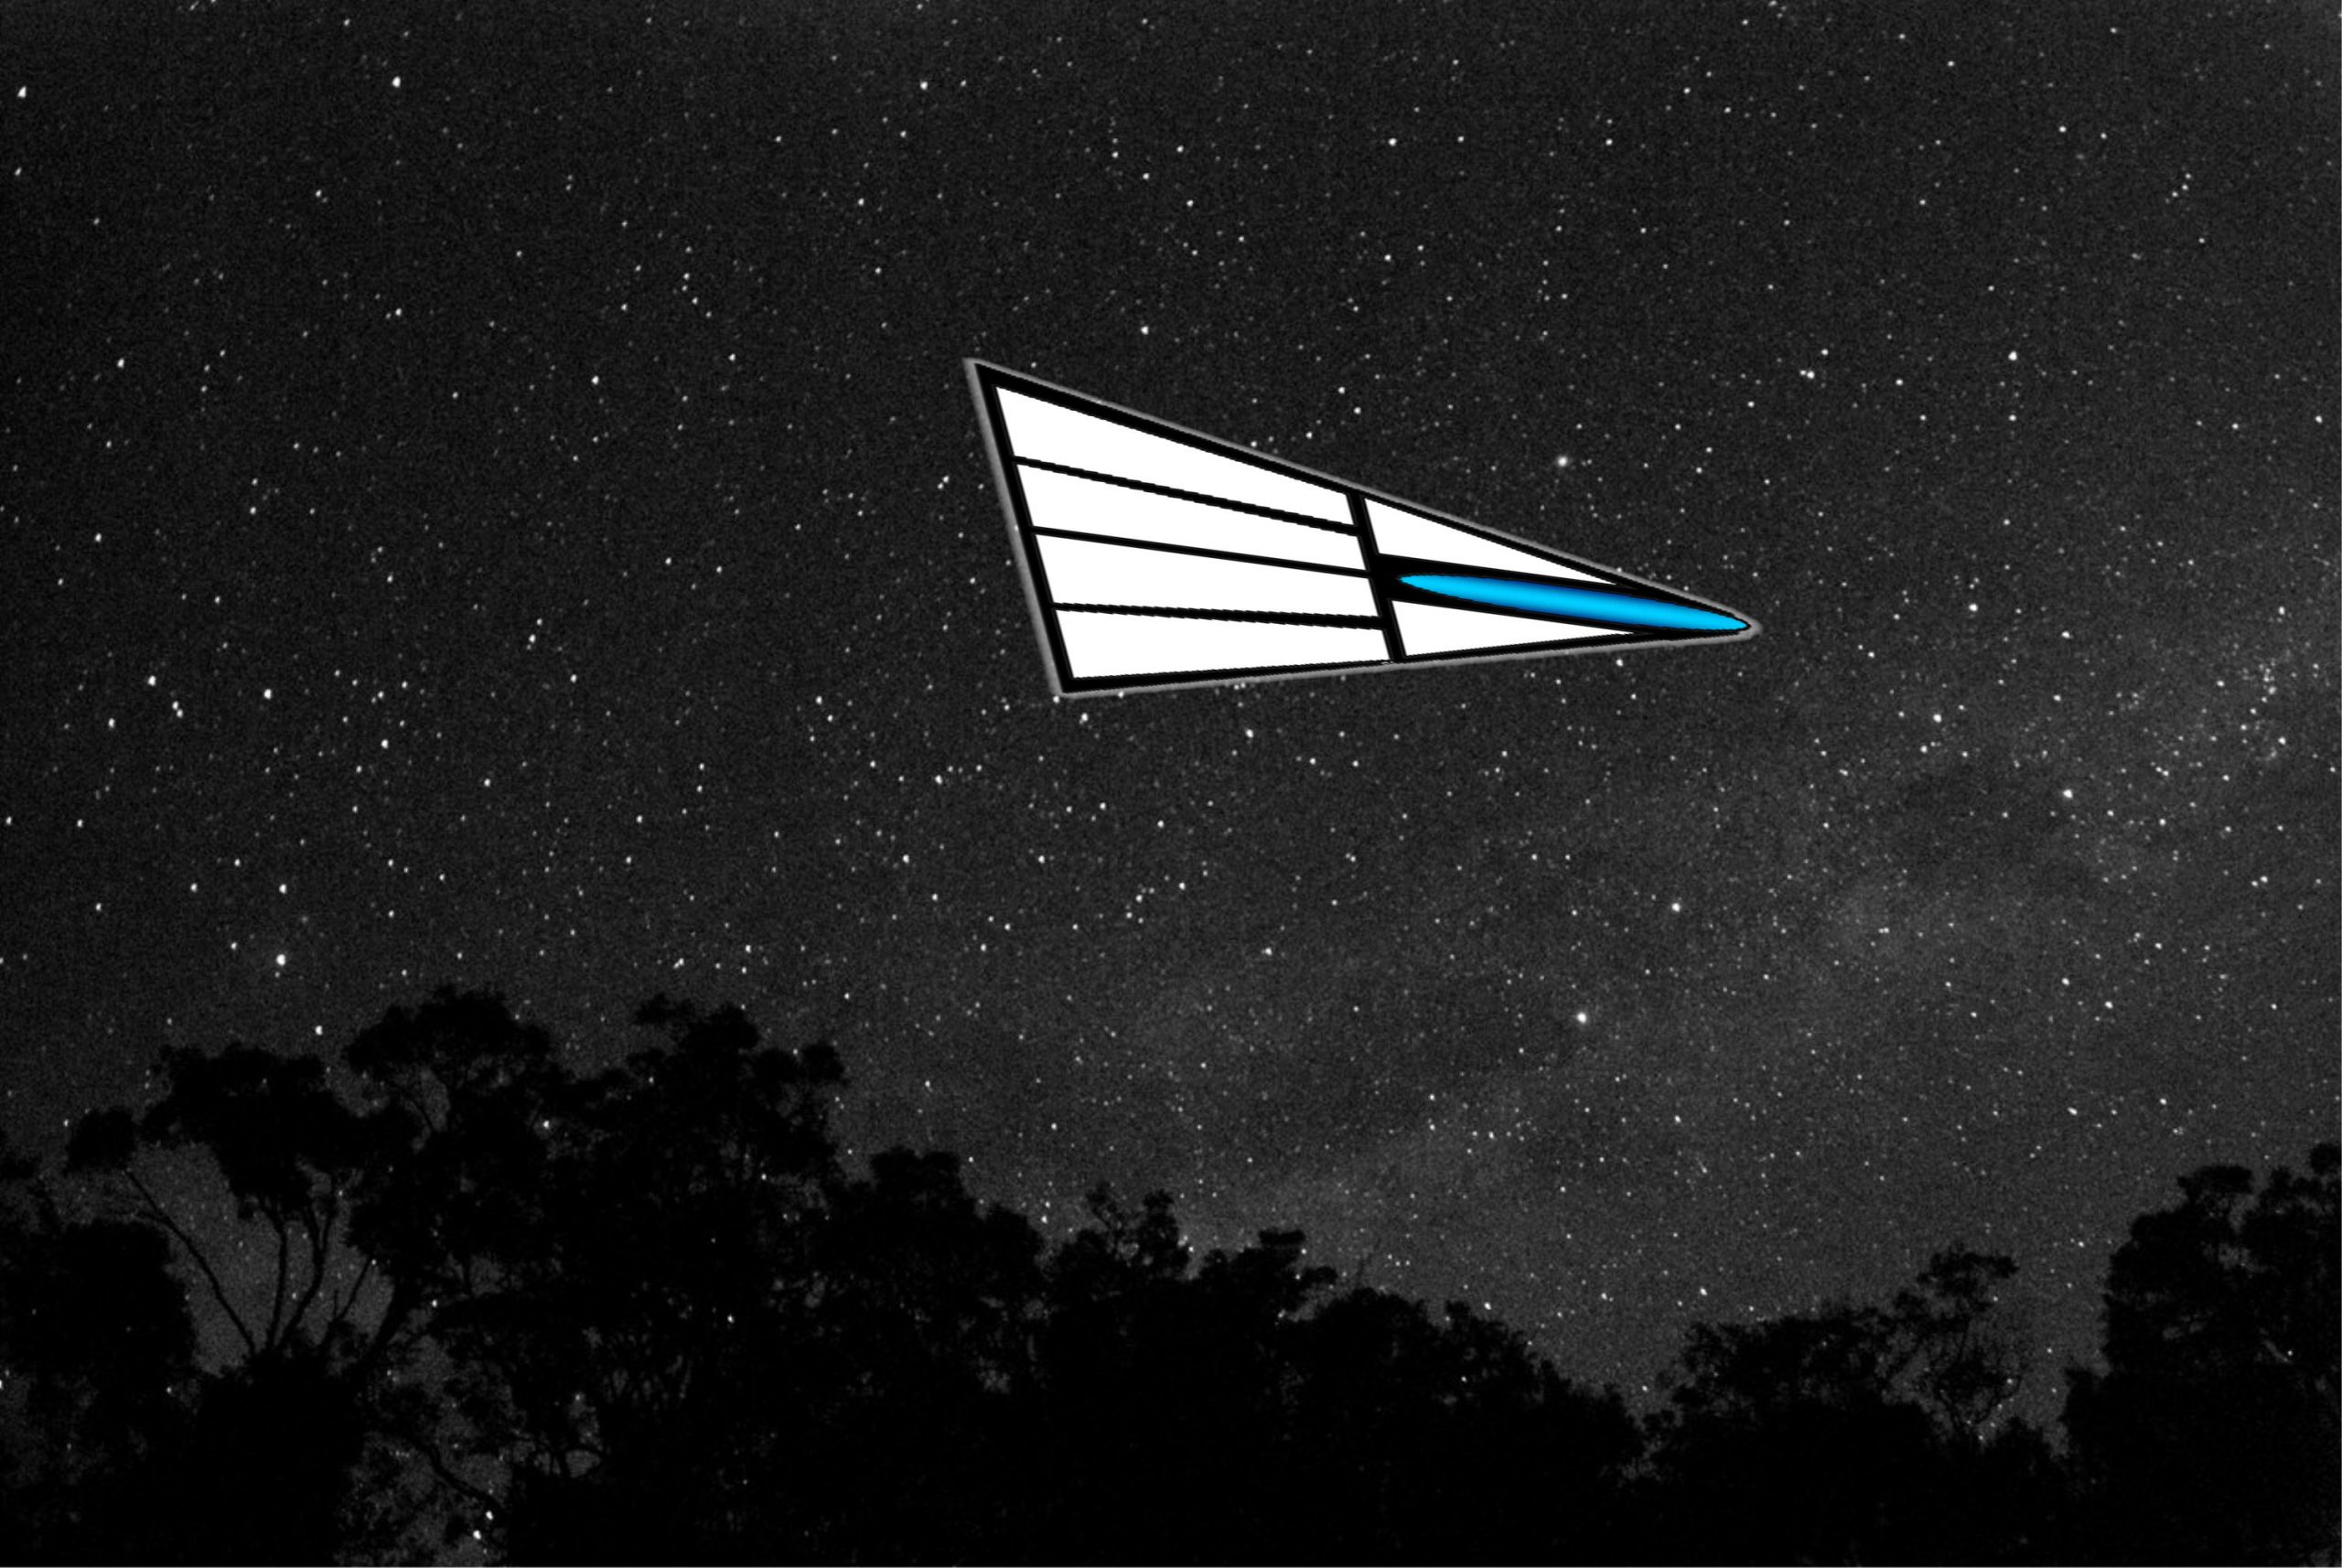 Triangular UFO with white and blue lights.